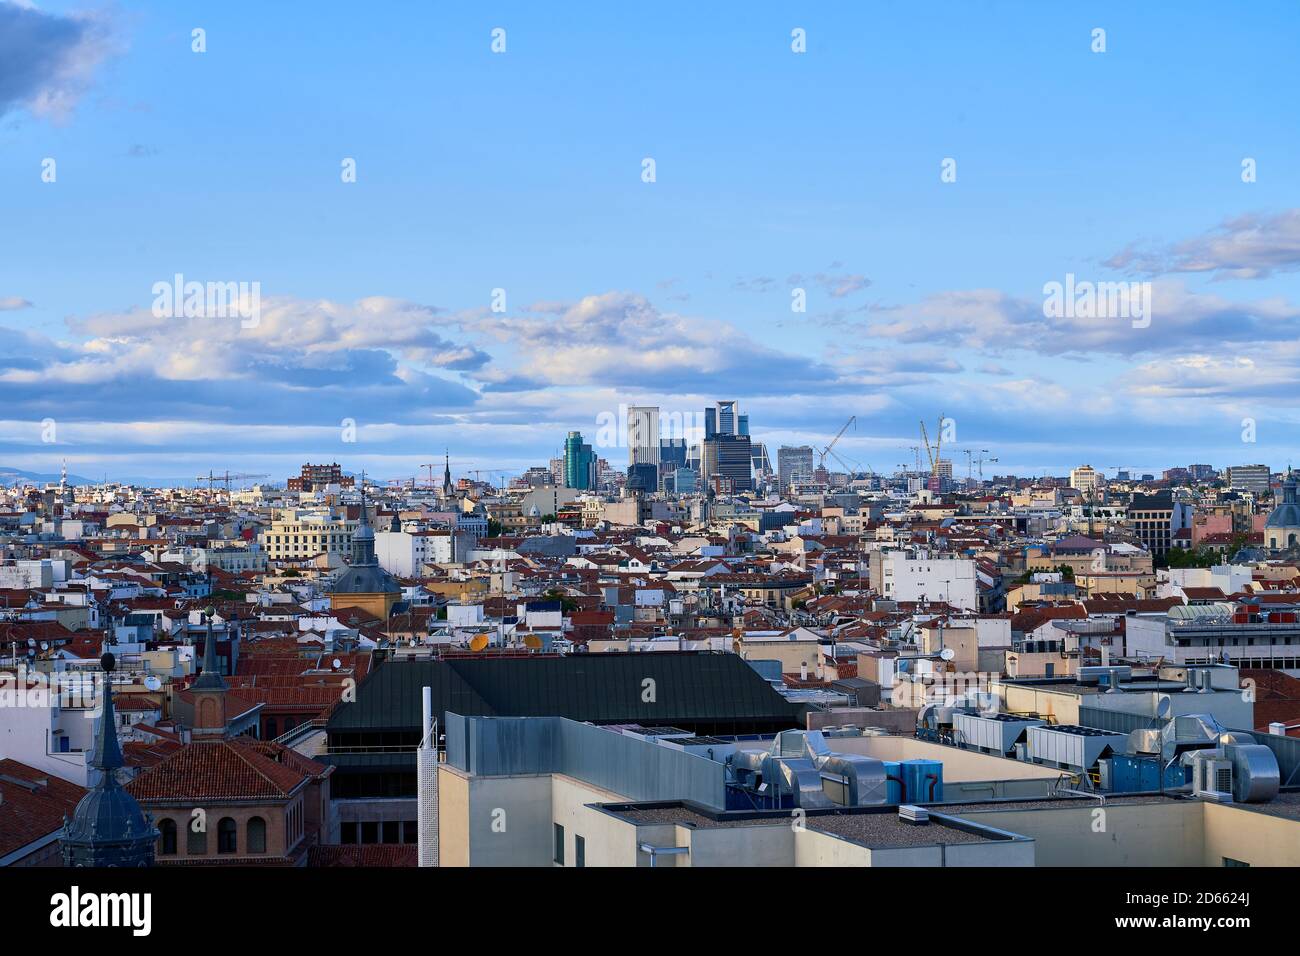 View from the Circulo de bellas artes across the rooftops towards the mountains, Madrid, Spain, September 2020 Stock Photo